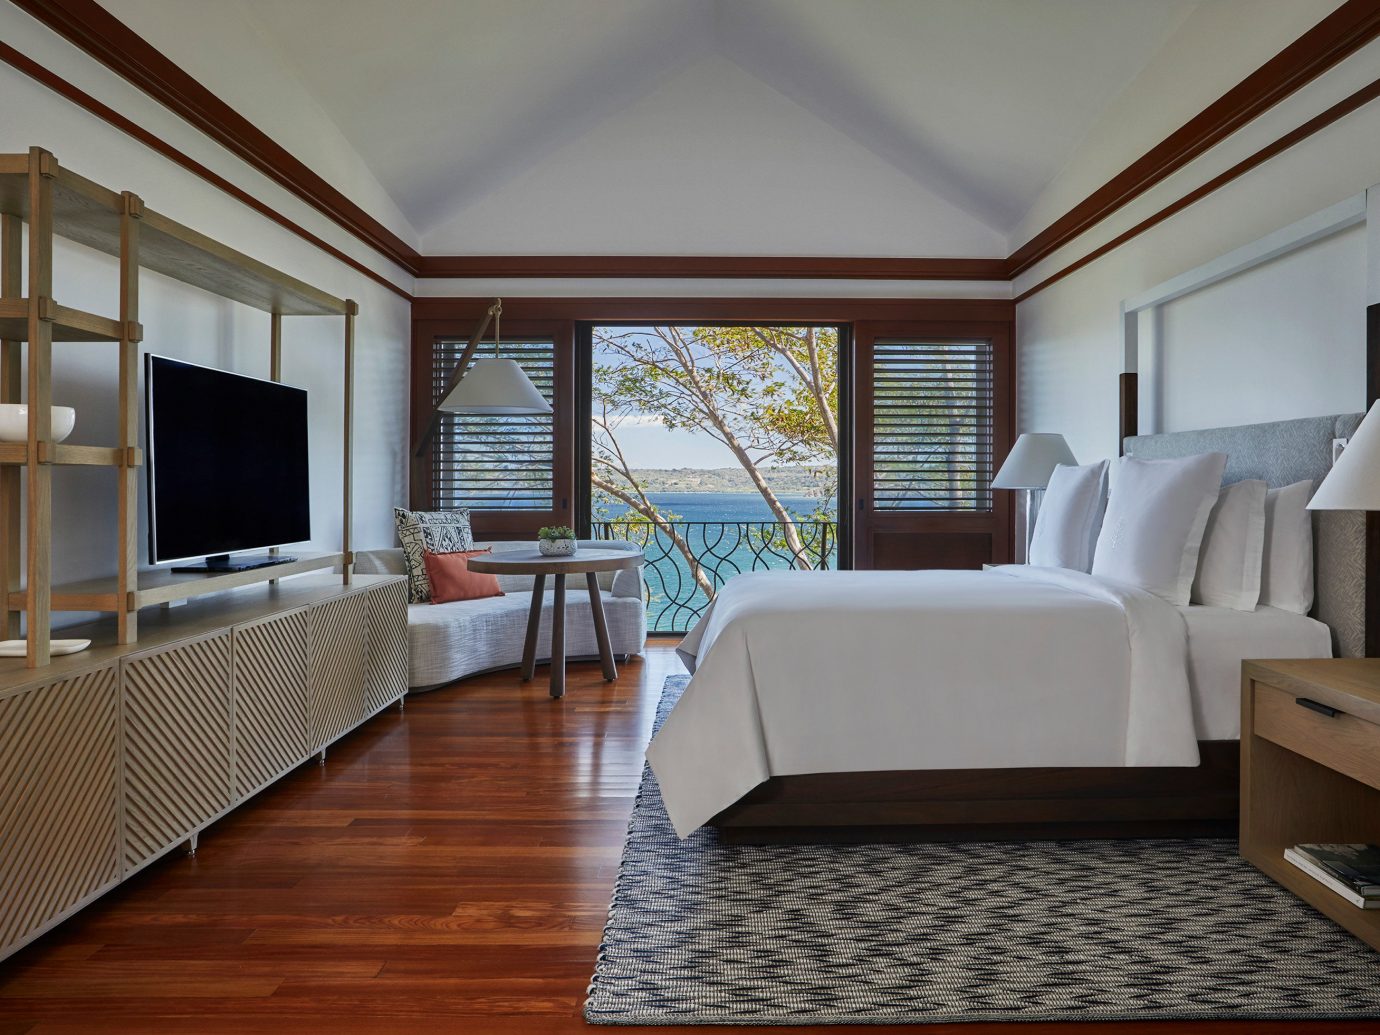 Bedroom at the Four Seasons Costa Rica